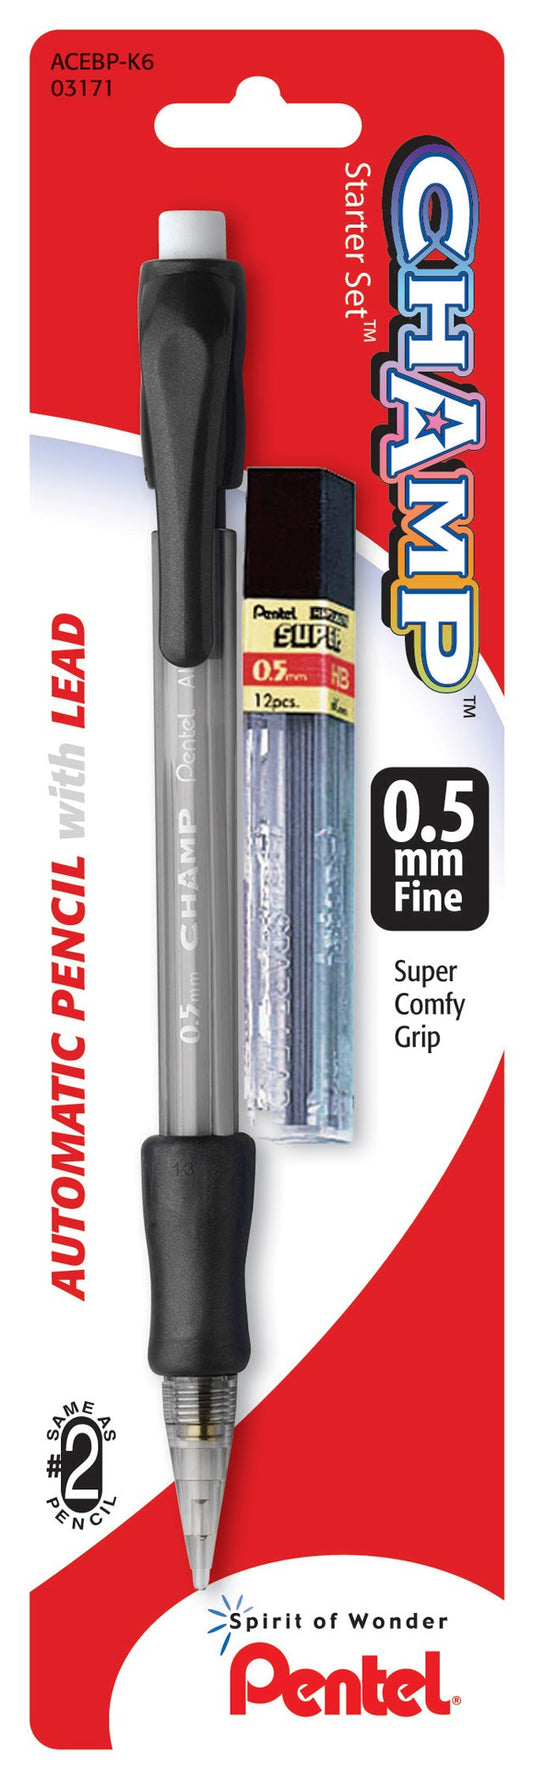 Pentel Acebp 0.5mm Champ Starter Set Automatic Pencil With Lead (Pack of 6)